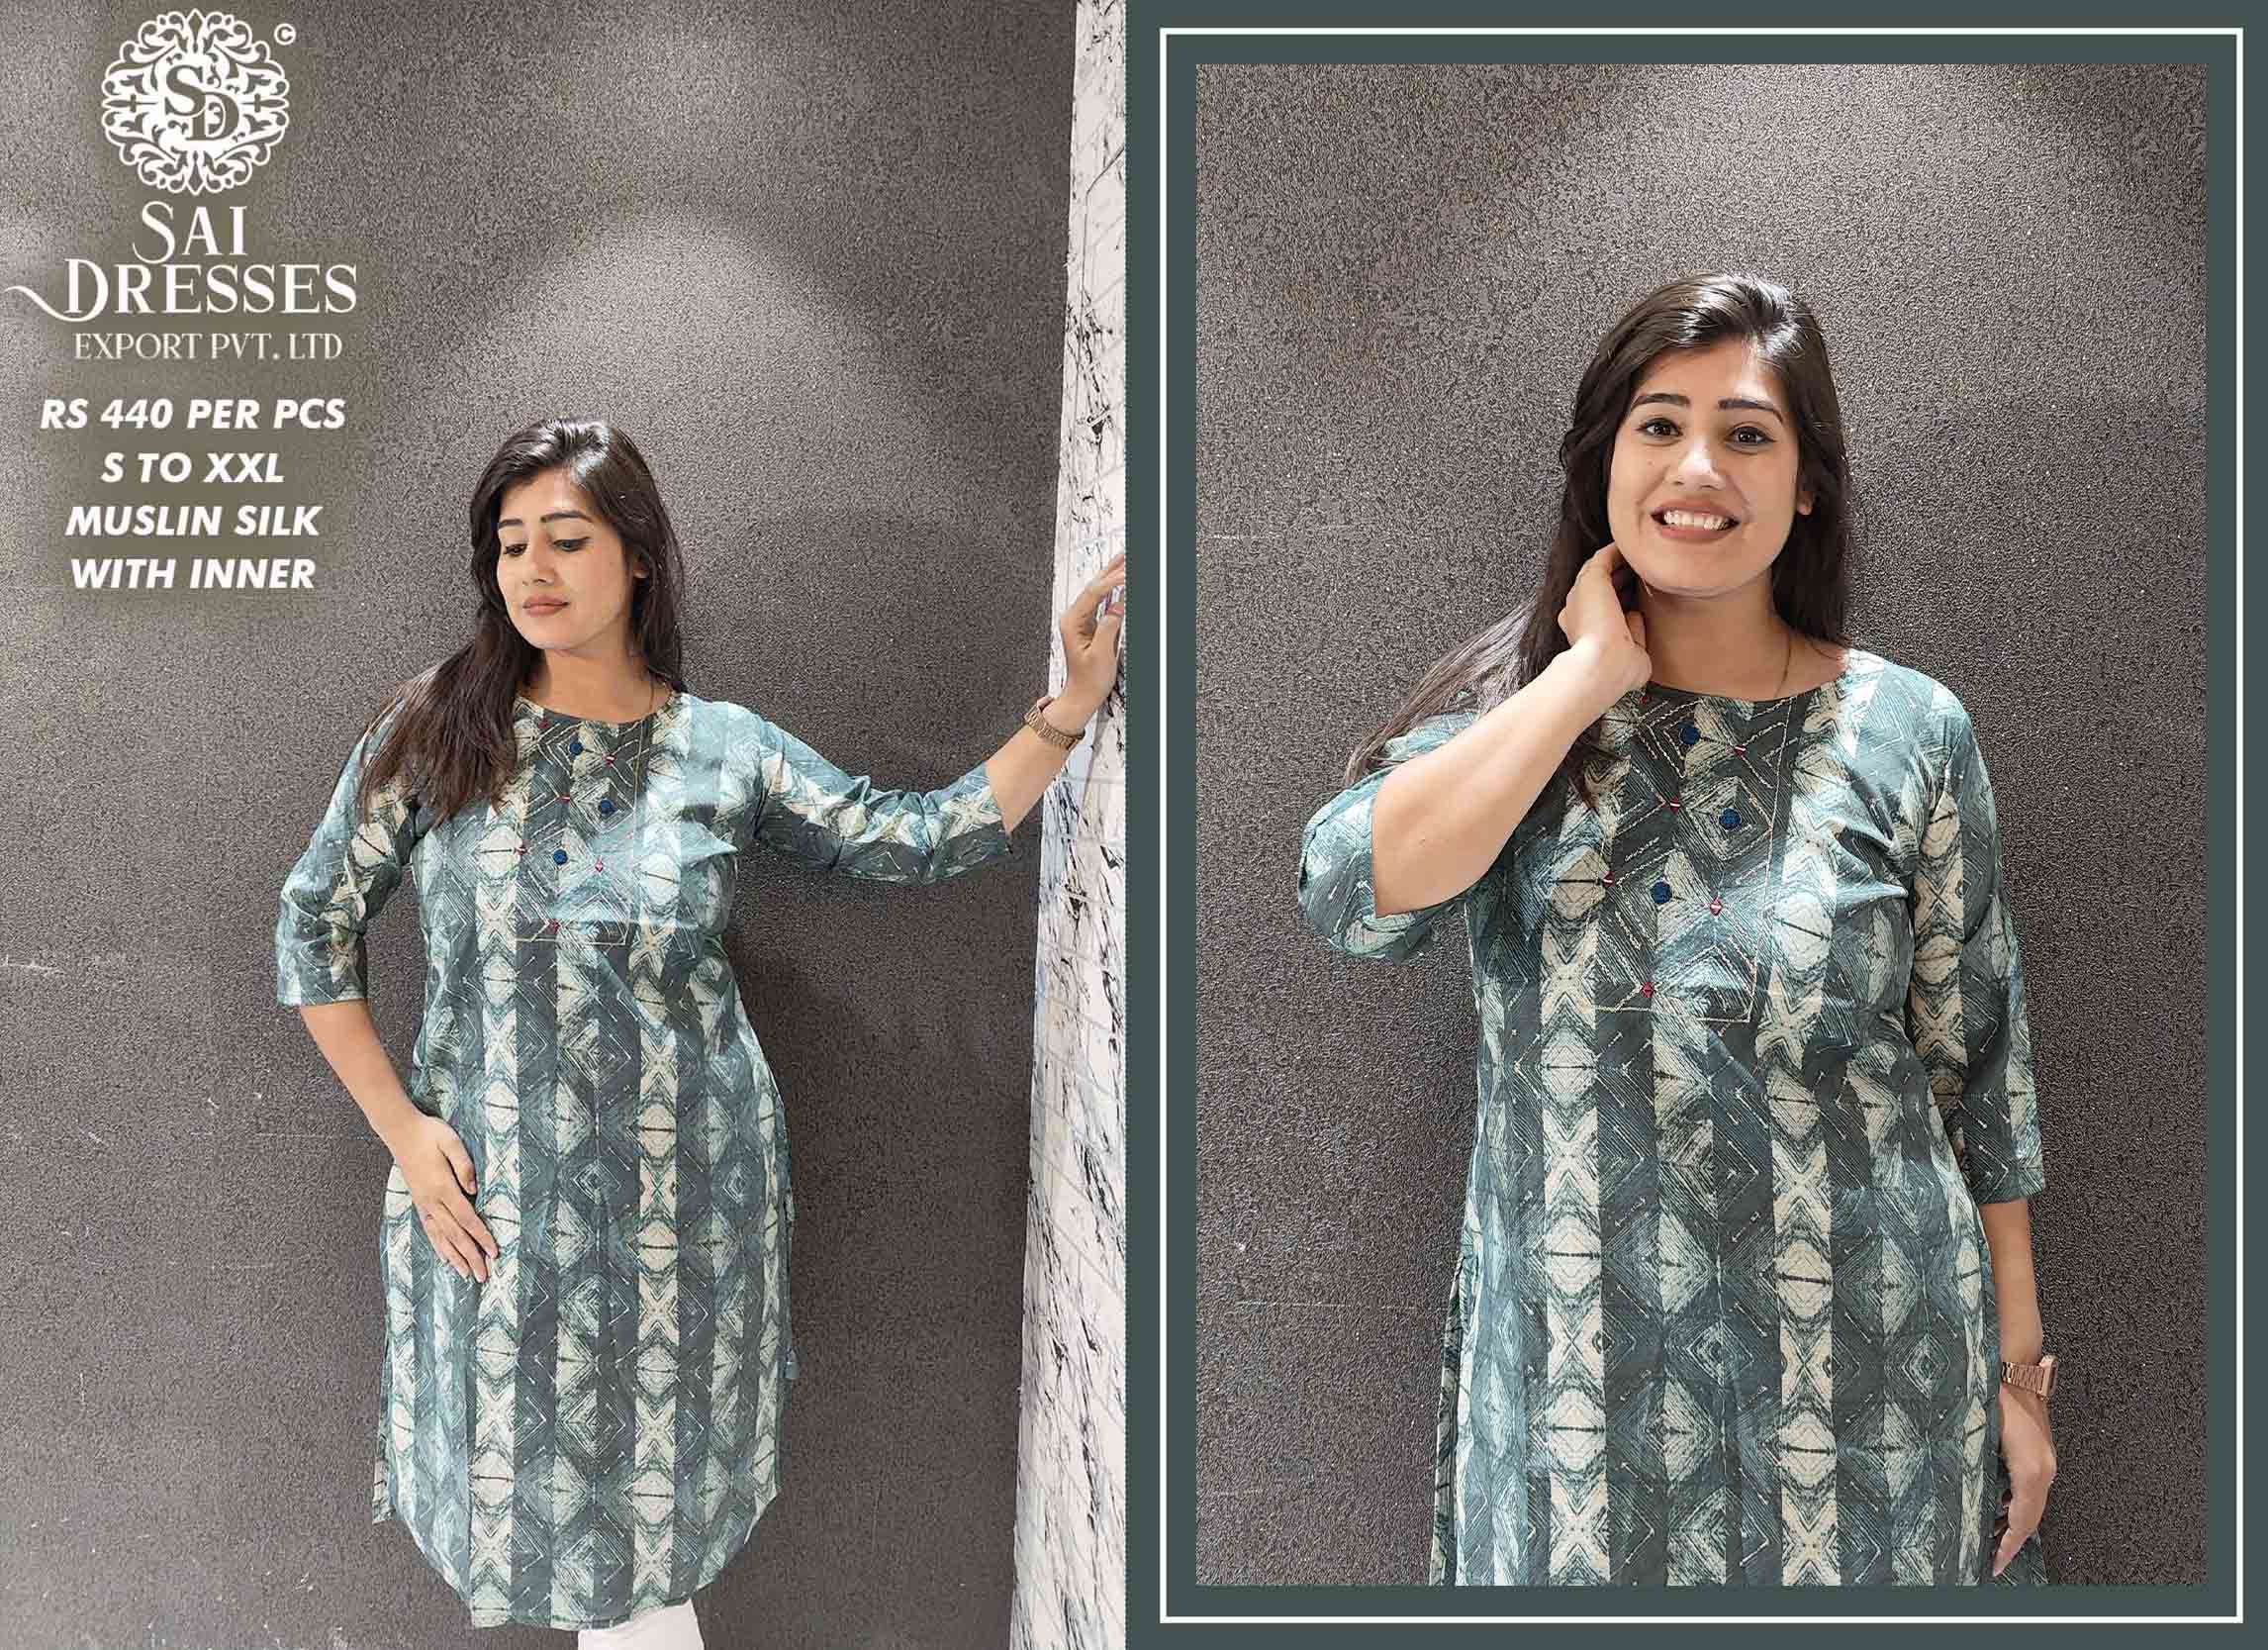 SAI DRESSES PRESENT D.NO SD43 READY TO WEAR DIGITAL PRINTED KURTI COMBO COLLECTION IN WHOLESALE RATE IN SURAT